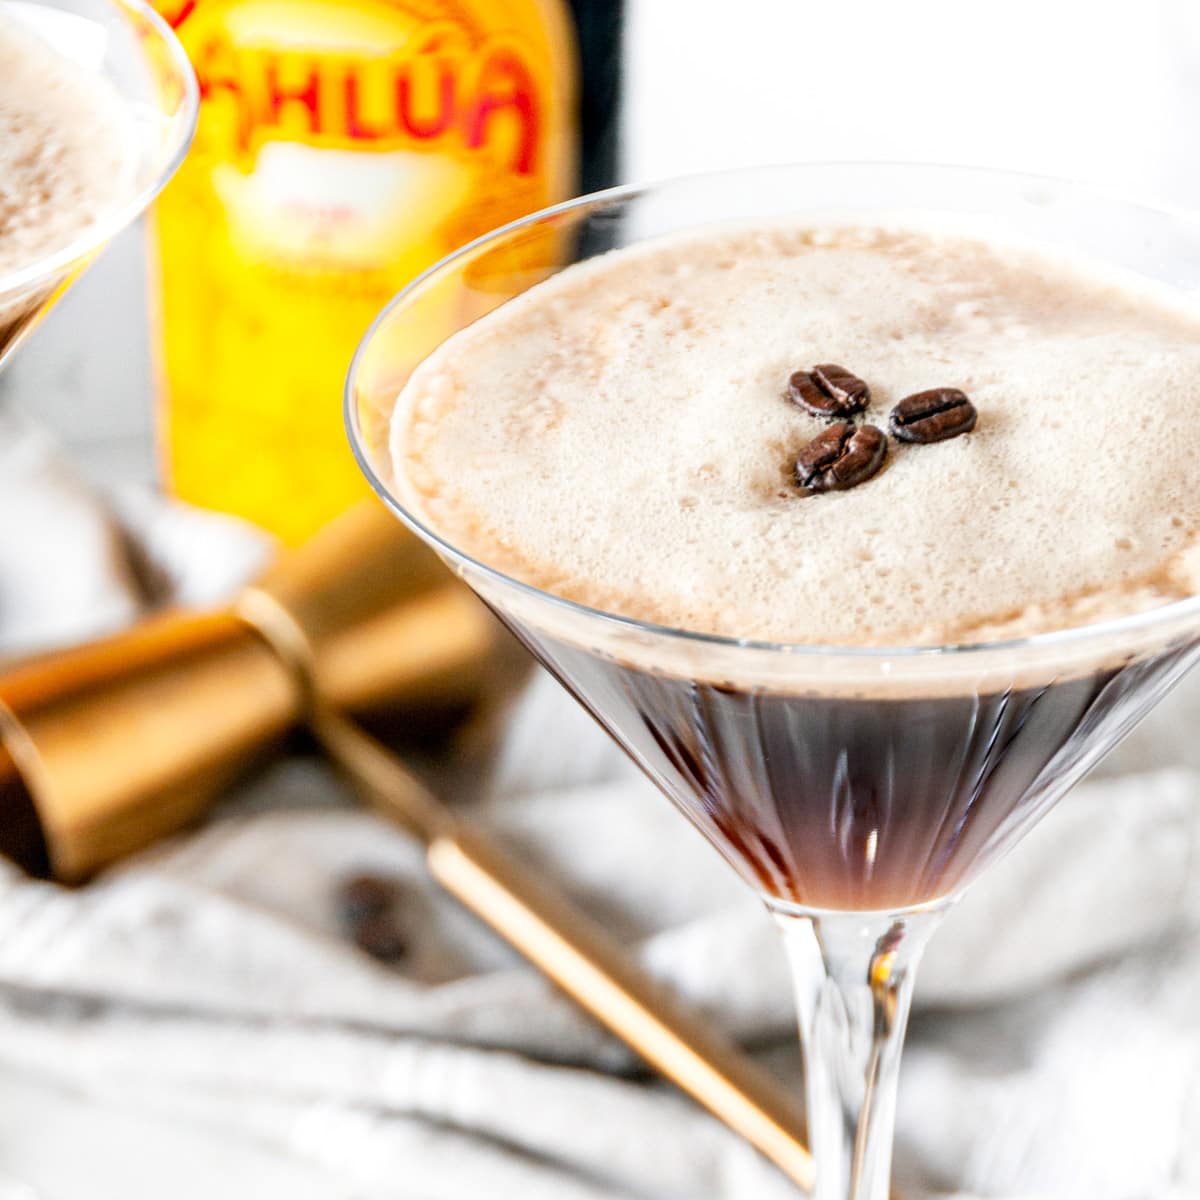 Espresso martini cocktail with foam and three coffee beans in glass close up with kahlua bottle in the background